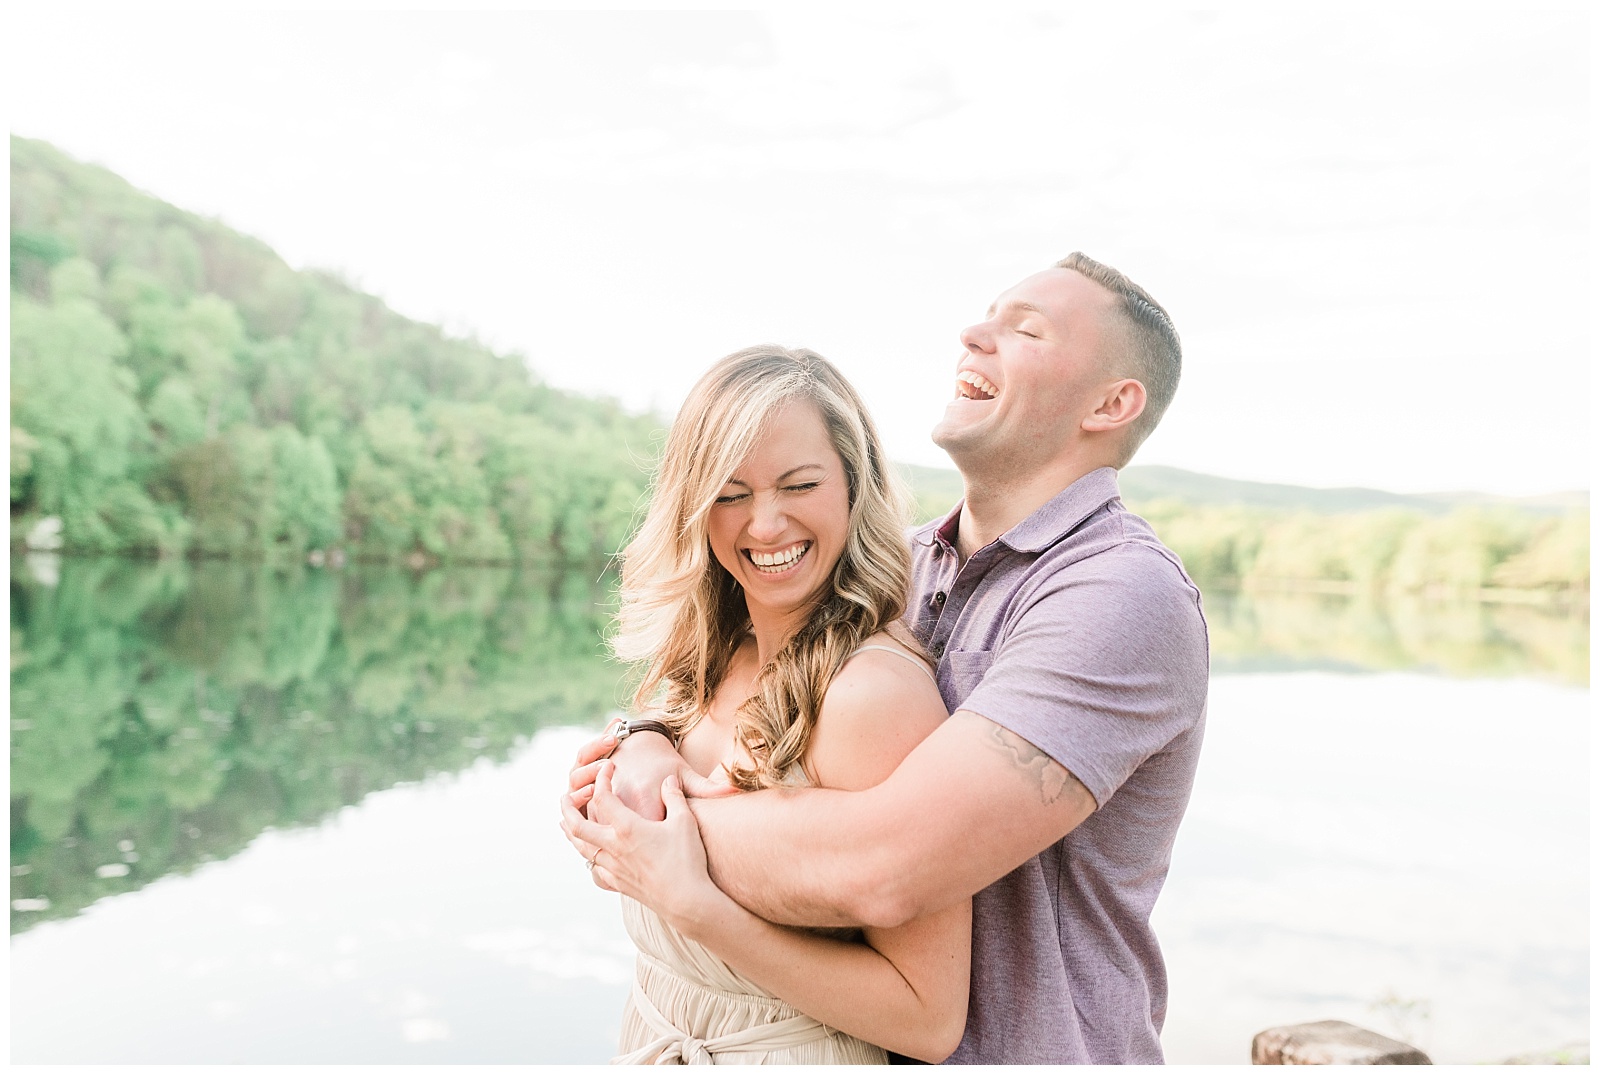 A man holds his fiancee from behind laughing together.